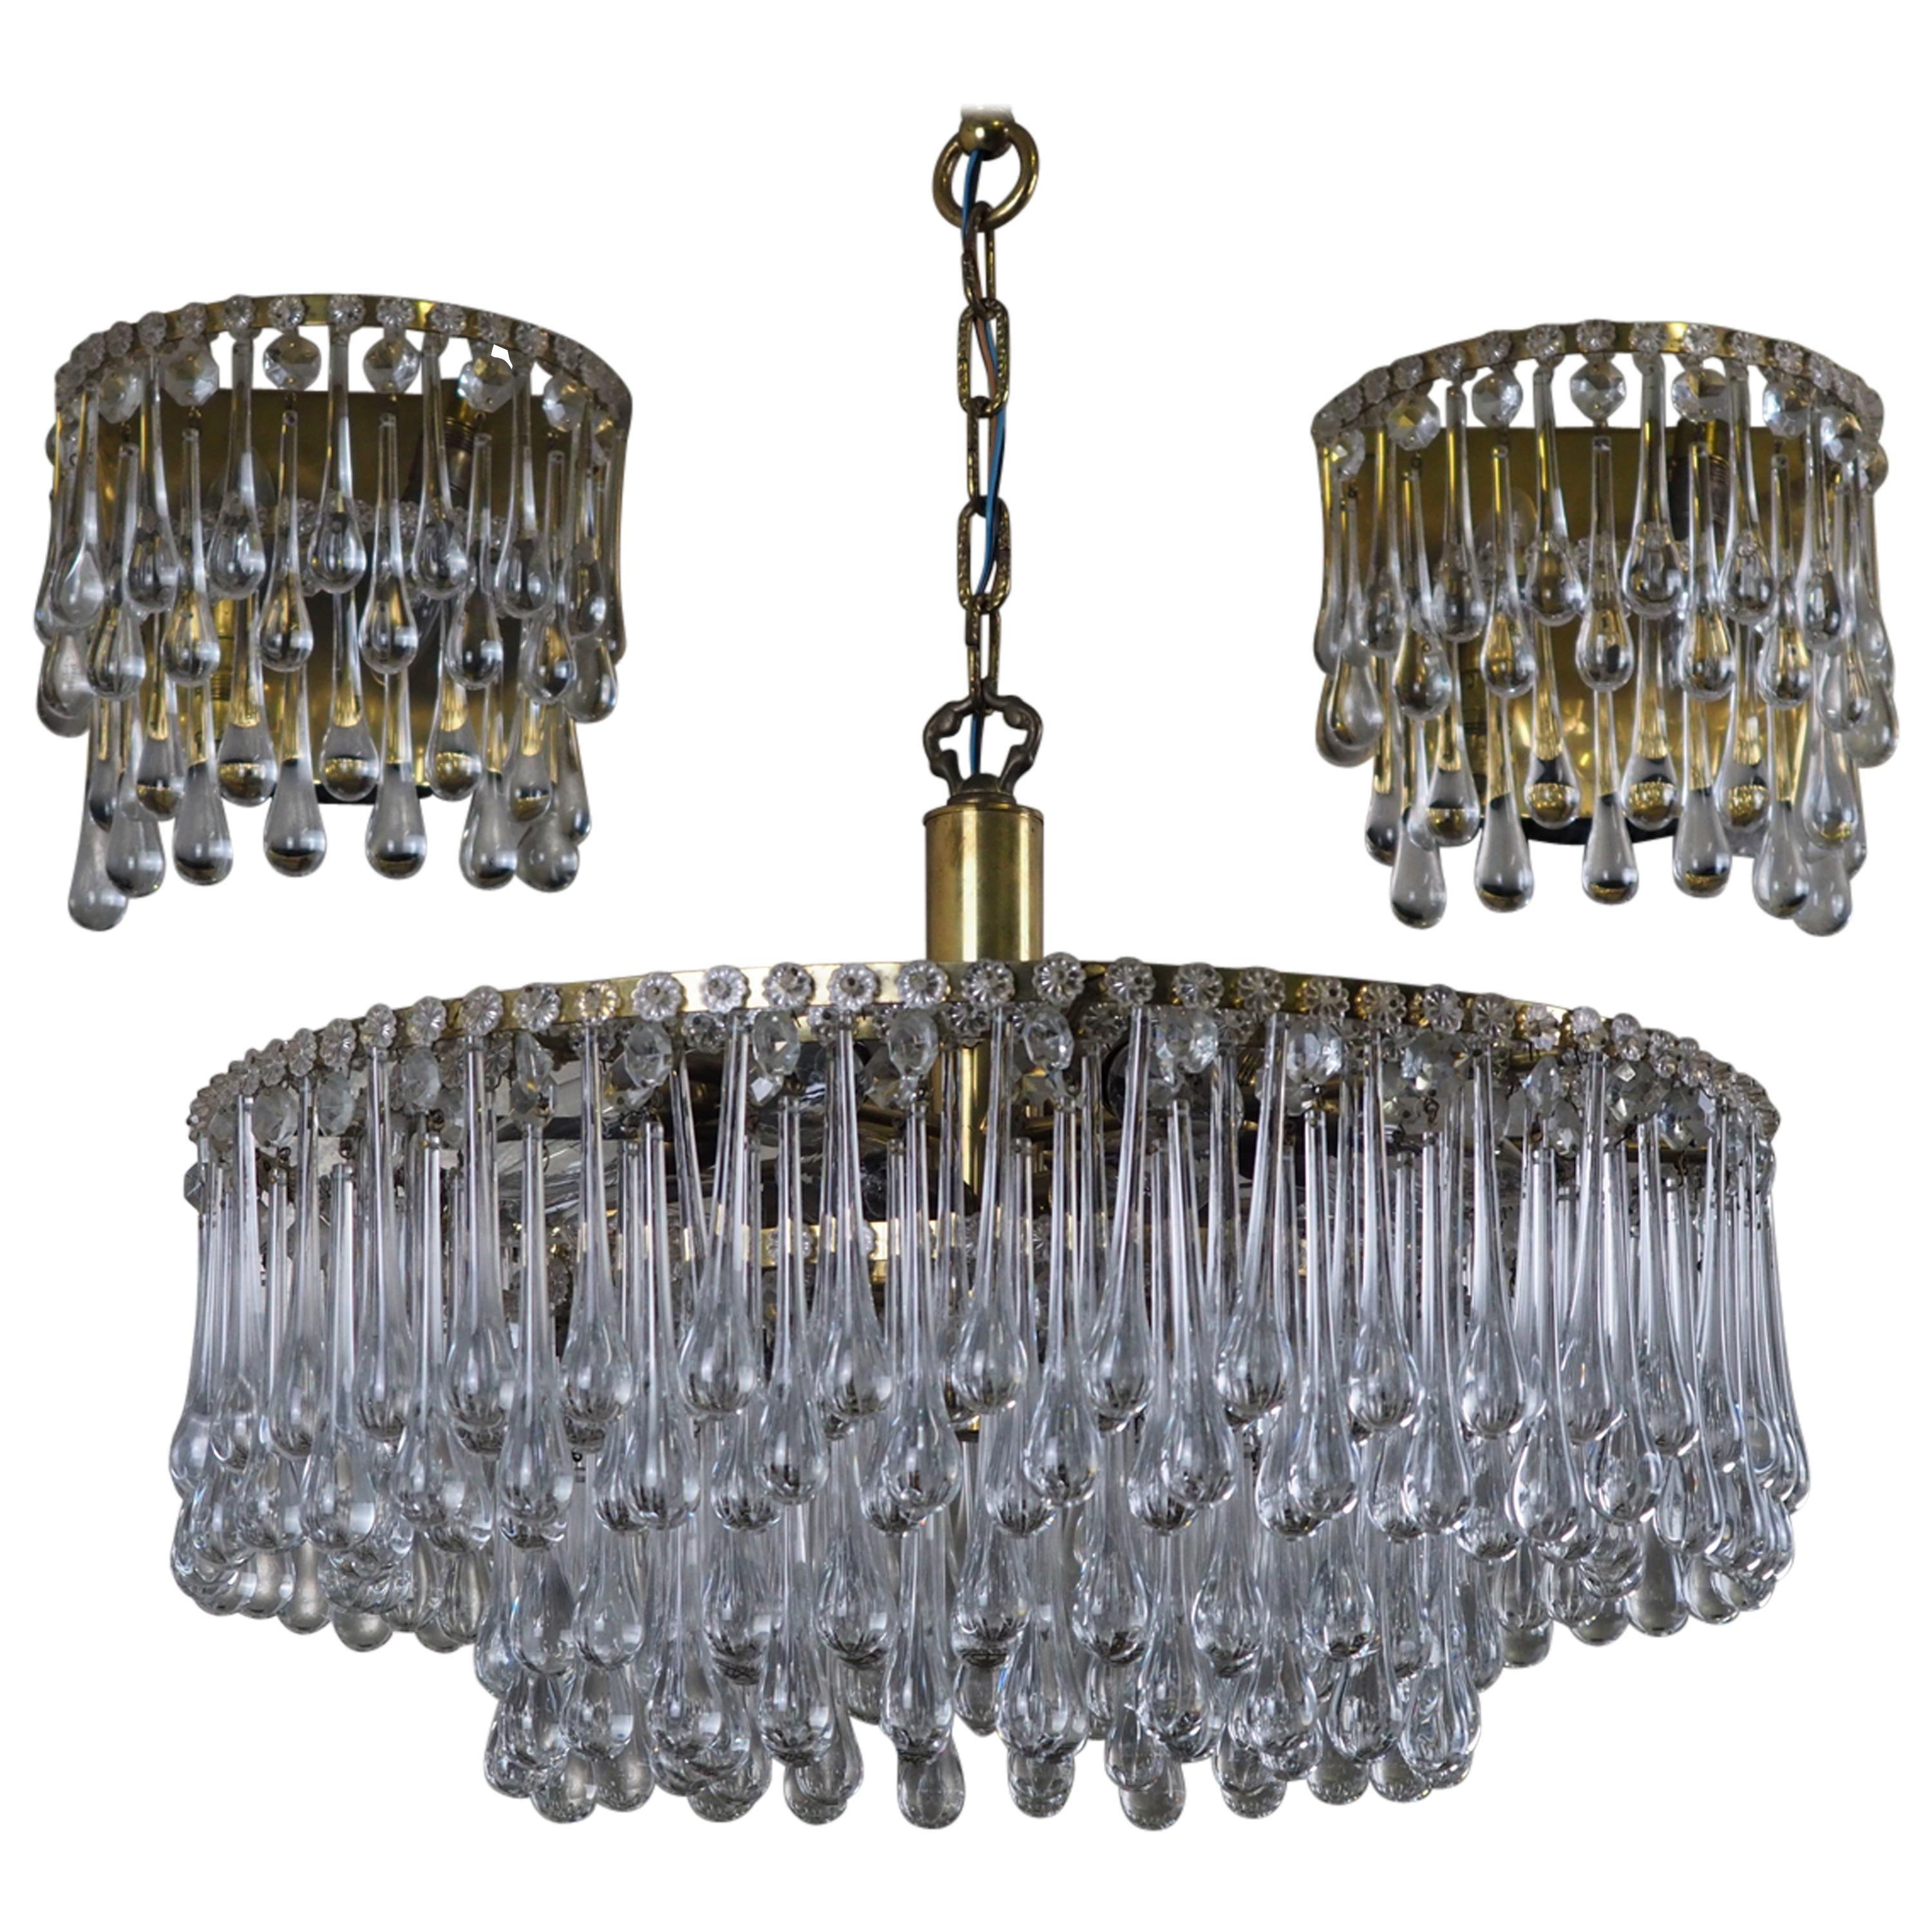 A wonderful set of Mid-Century Modern glass tear drop chandelier and wall sconces attributed to E. Palme, Germany, circa 1960s.

Measurements:
Chandelier: Height - 28.74 inches/ Diameter - 20.74 inches
Socket : 14 x e14 standard screw